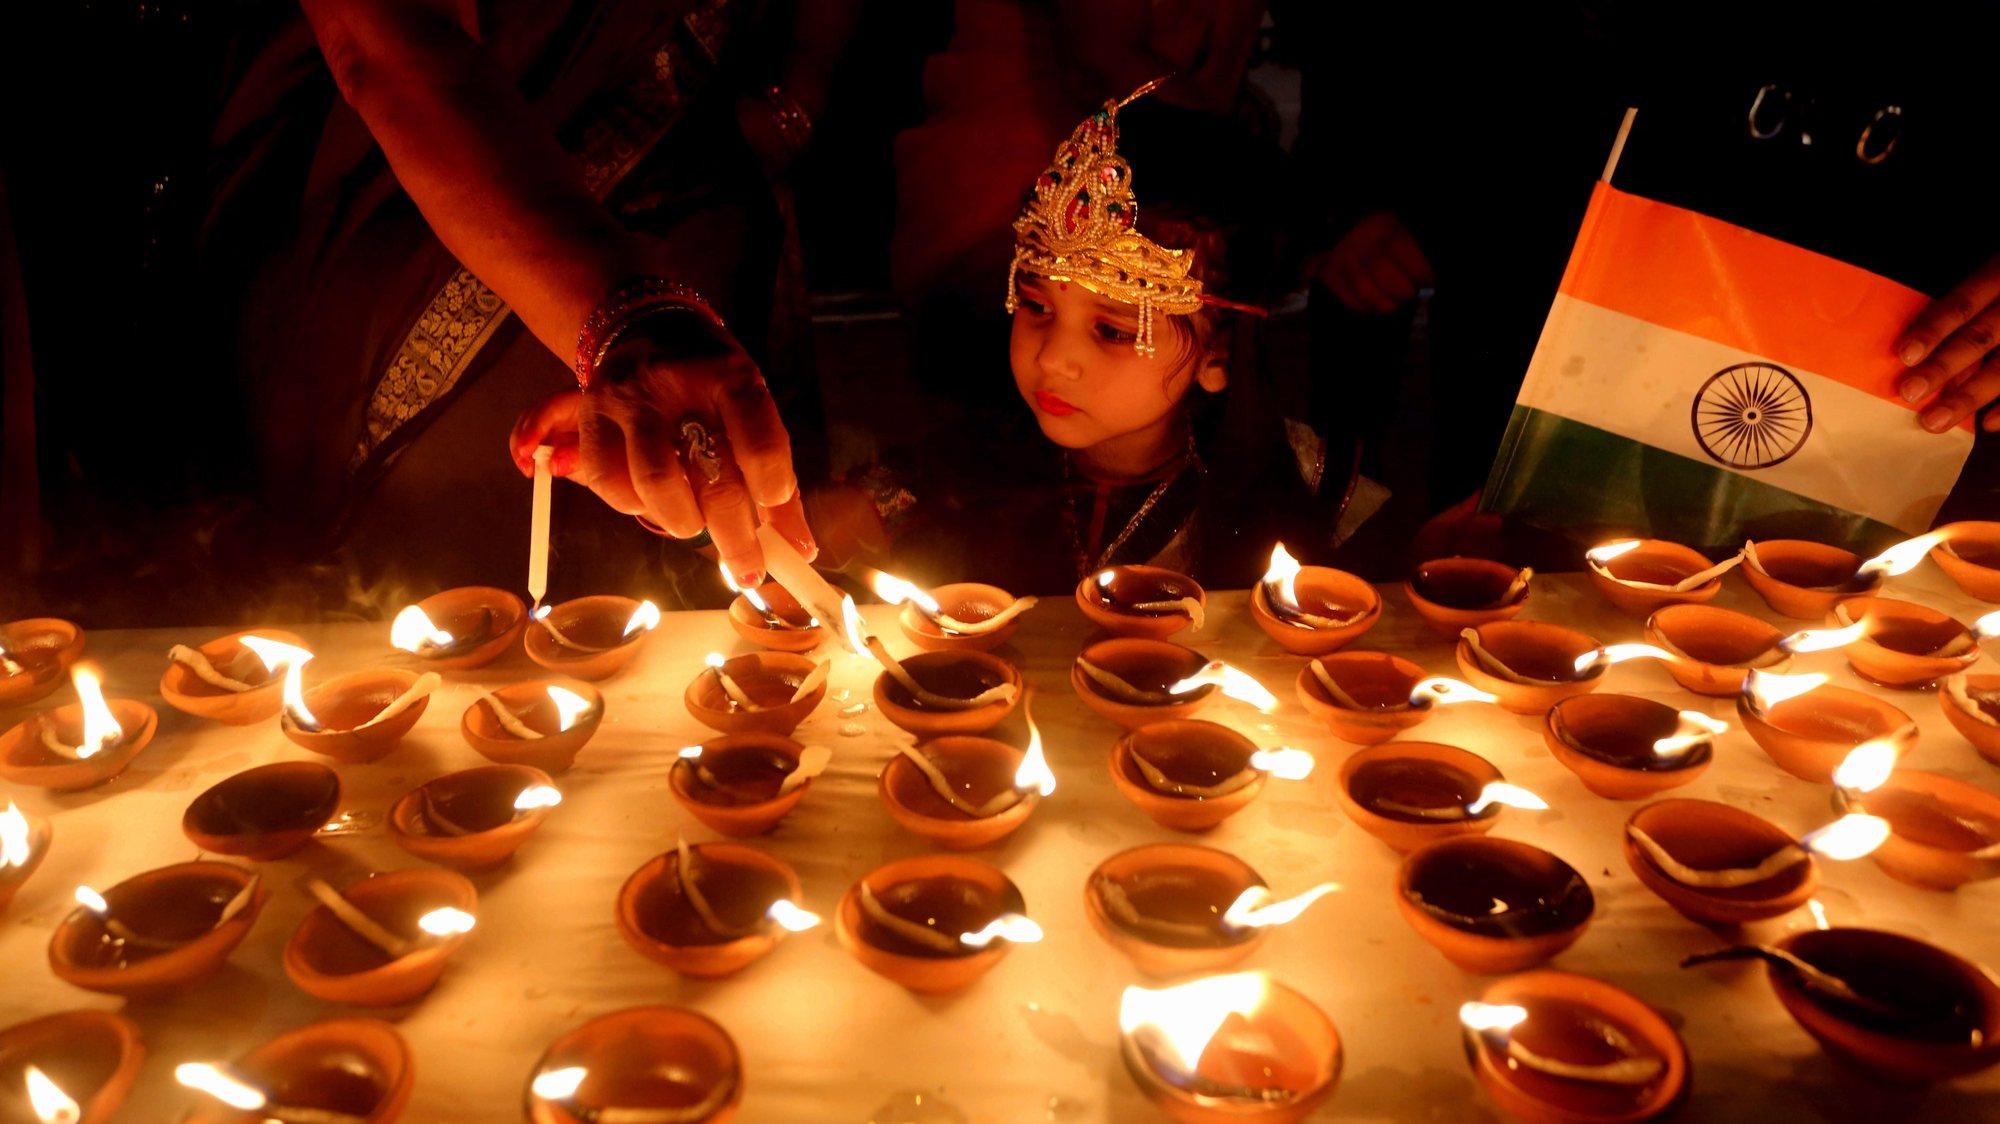 epa08818524 Indian people light lamps at a temple on the occasion of Diwali, or the Festival of Lights, in Bhopal, India, 13 November 2020. The Diwali festival celebrates the victory of good over evil and commemorates Lord Ram&#039;s return to his kingdom Ayodhya after a 14-year exile. Diwali will be celebrated on 14 November 2020.  EPA/SANJEEV GUPTA